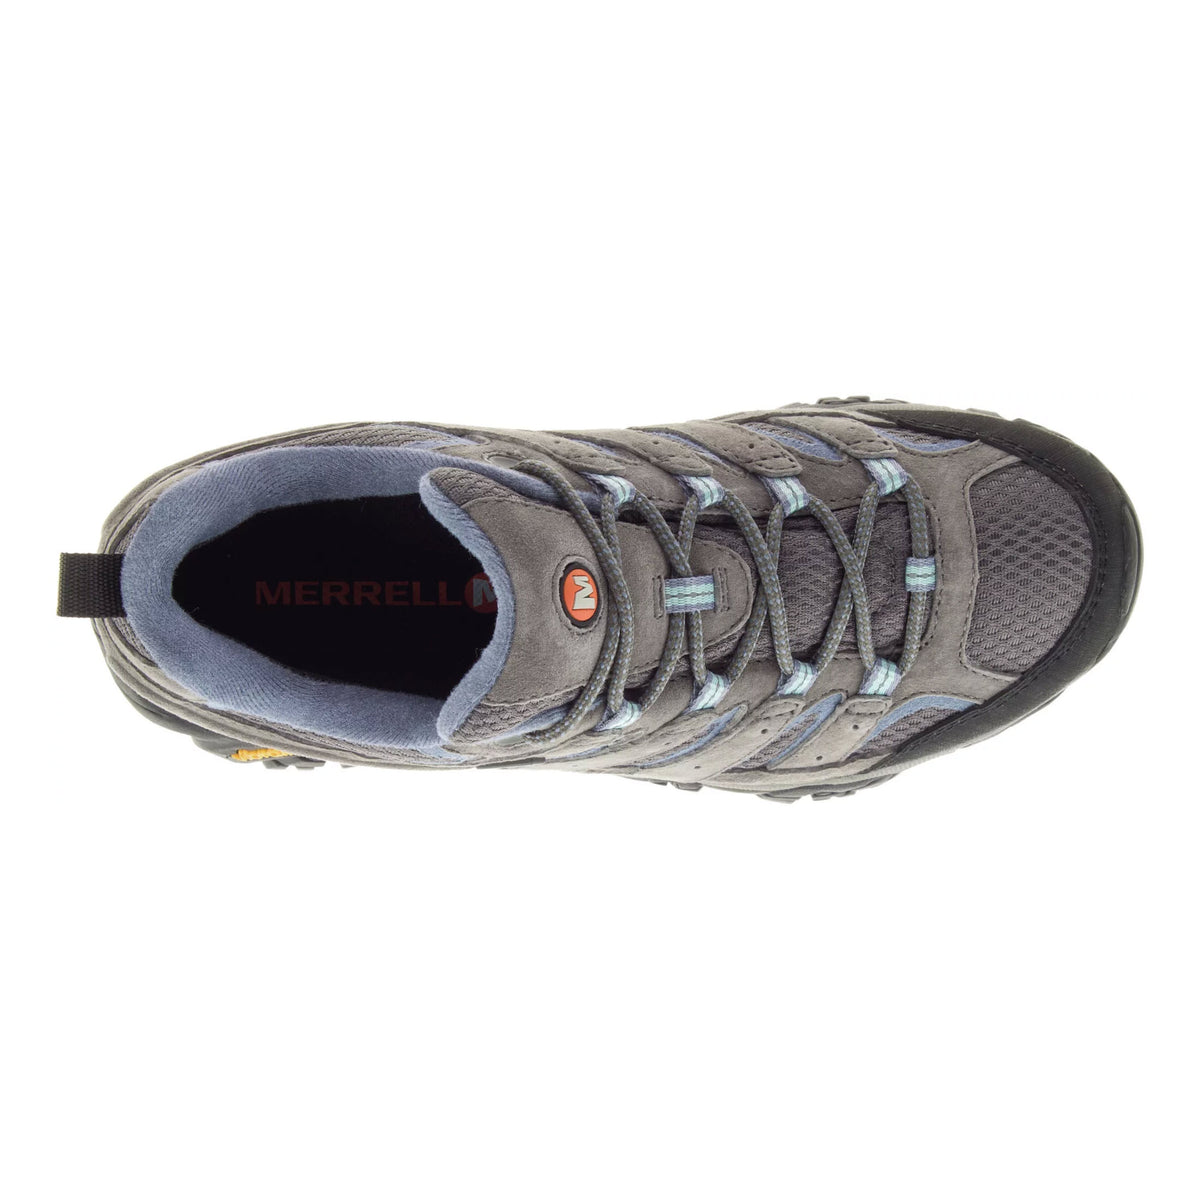 Top view of a gray Merrell MOAB 2 Granite - Womens waterproof hiking shoe showcasing laces, a dark inner lining, and the brand name visible on the insole.